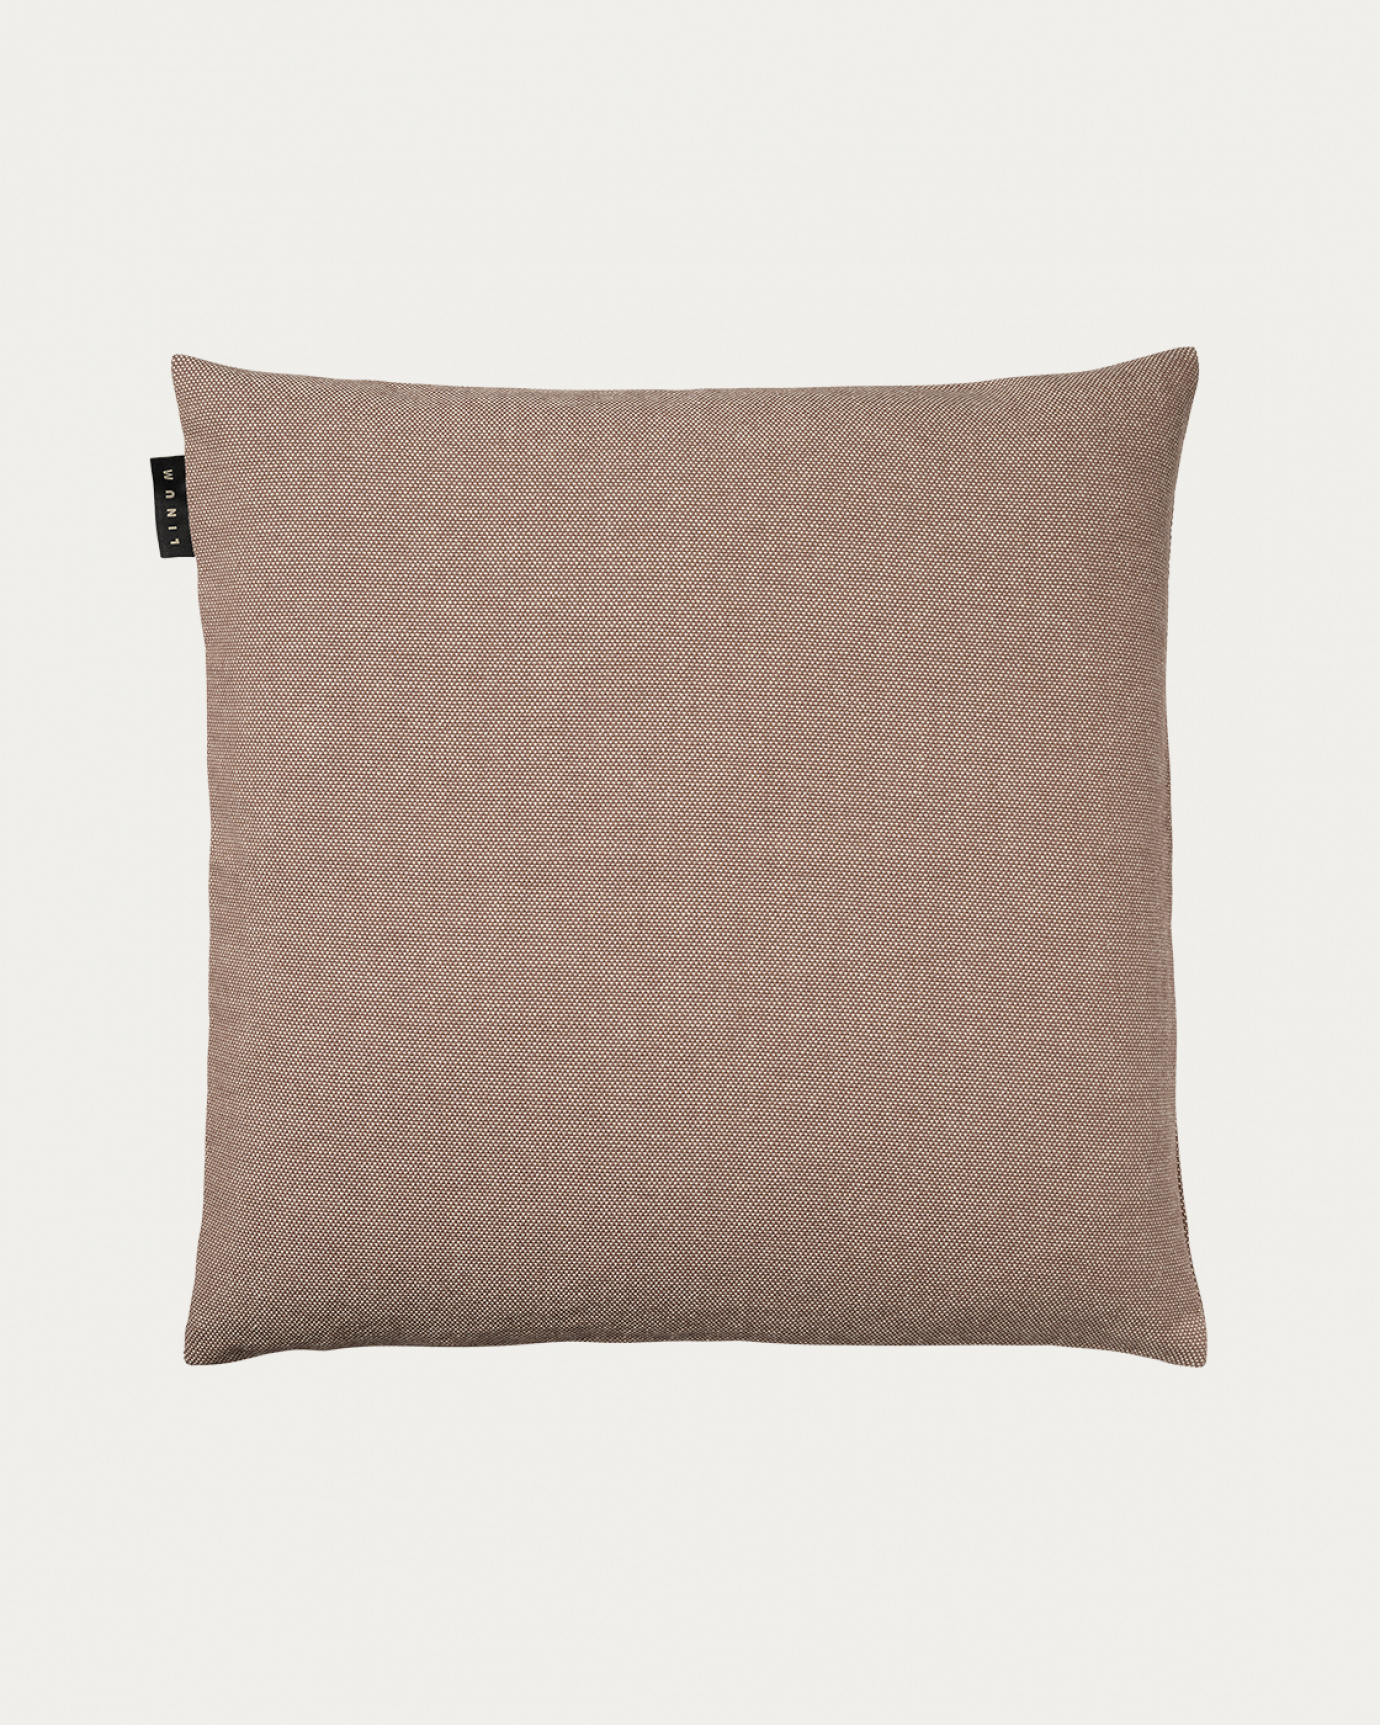 PEPPER Cushion cover 50x50 cm Dark mole brown in the group ASSORTMENT / STANDARD / Cushion covers at LINUM DESIGN (23PEP05000B45)